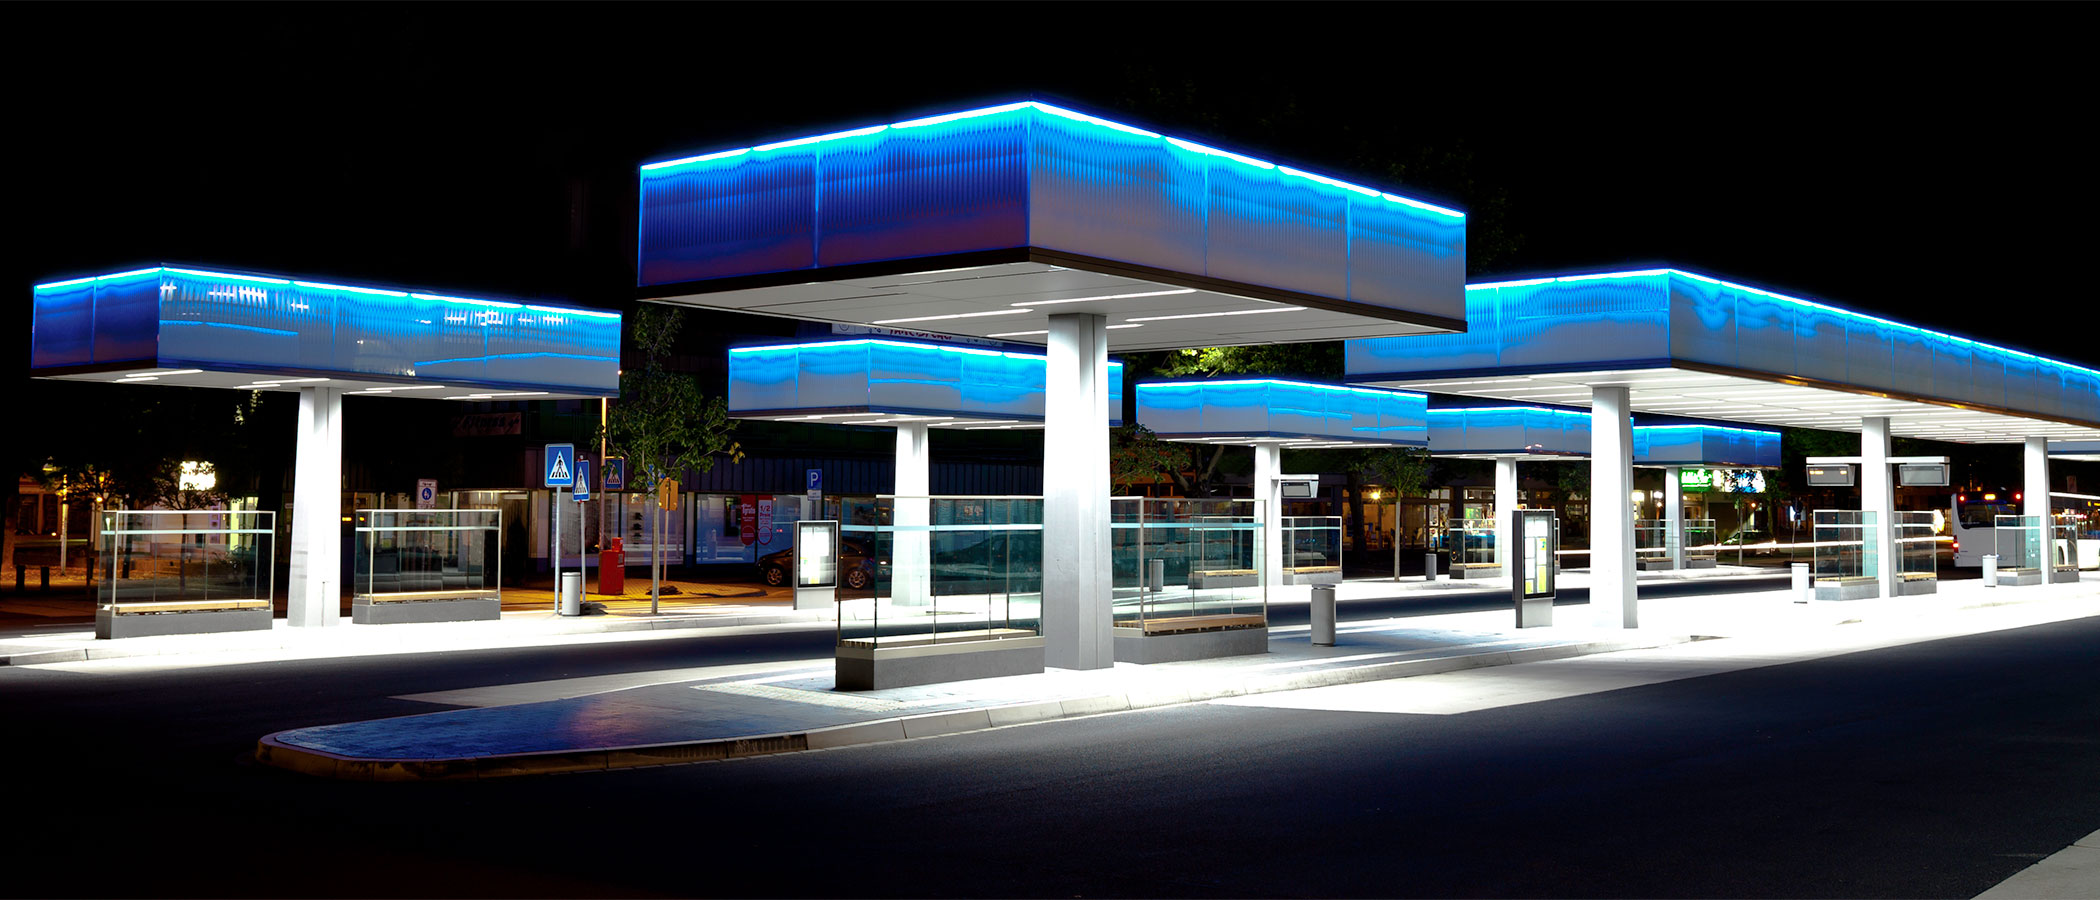 A modern bus terminal lit by blue and white LED lighting under protected canopies.